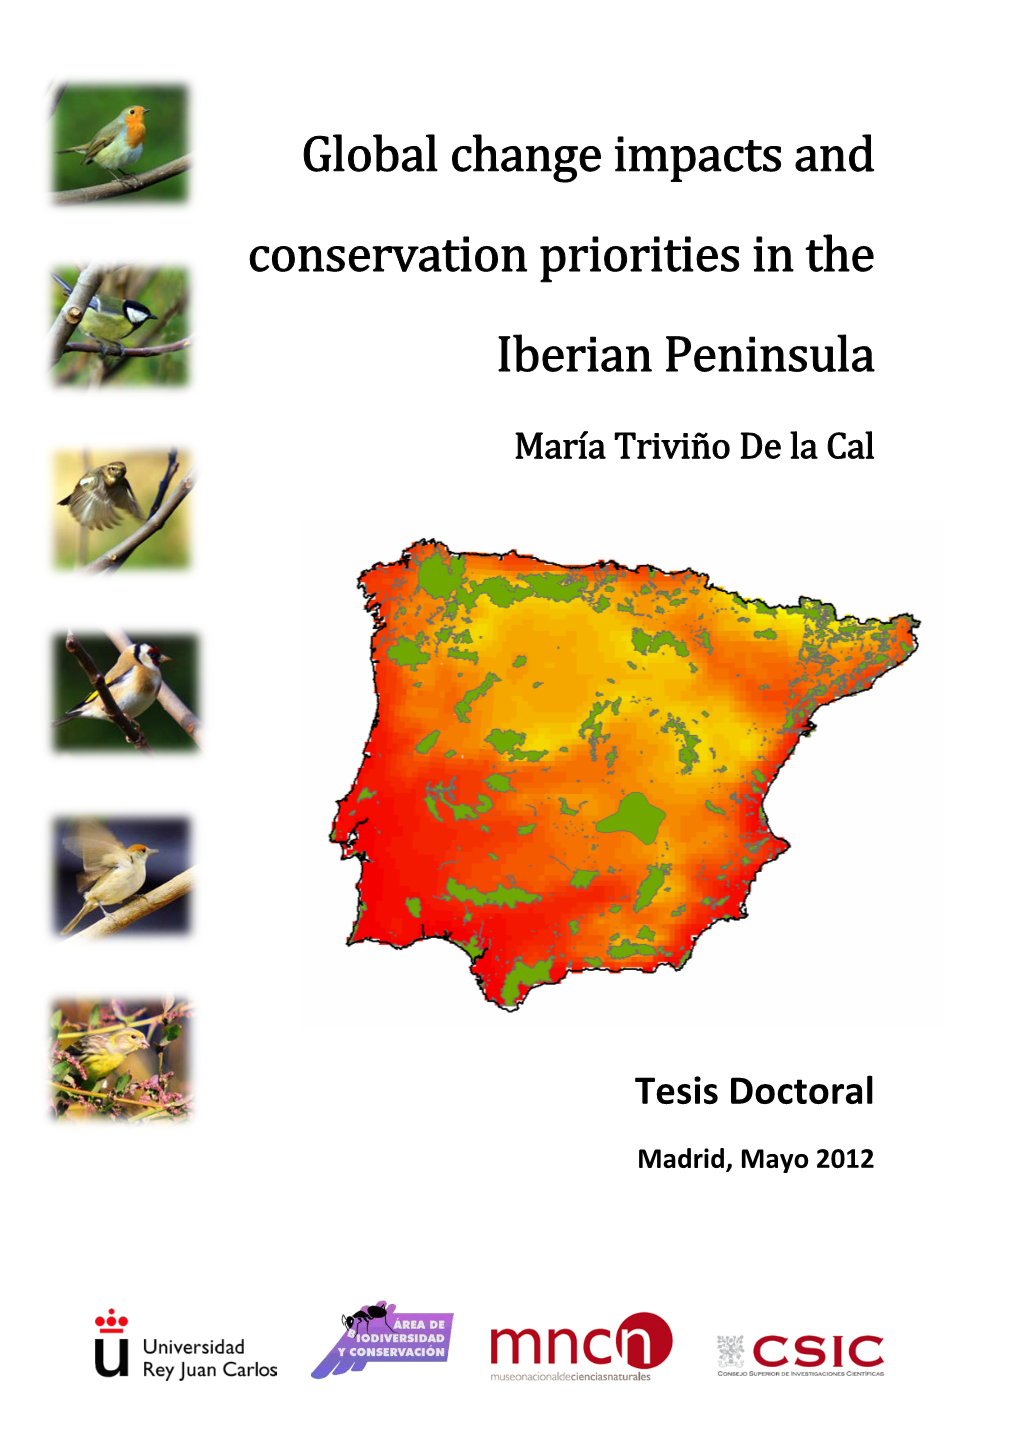 Global Change Impacts and Conservation Priorities in the Iberian Peninsula